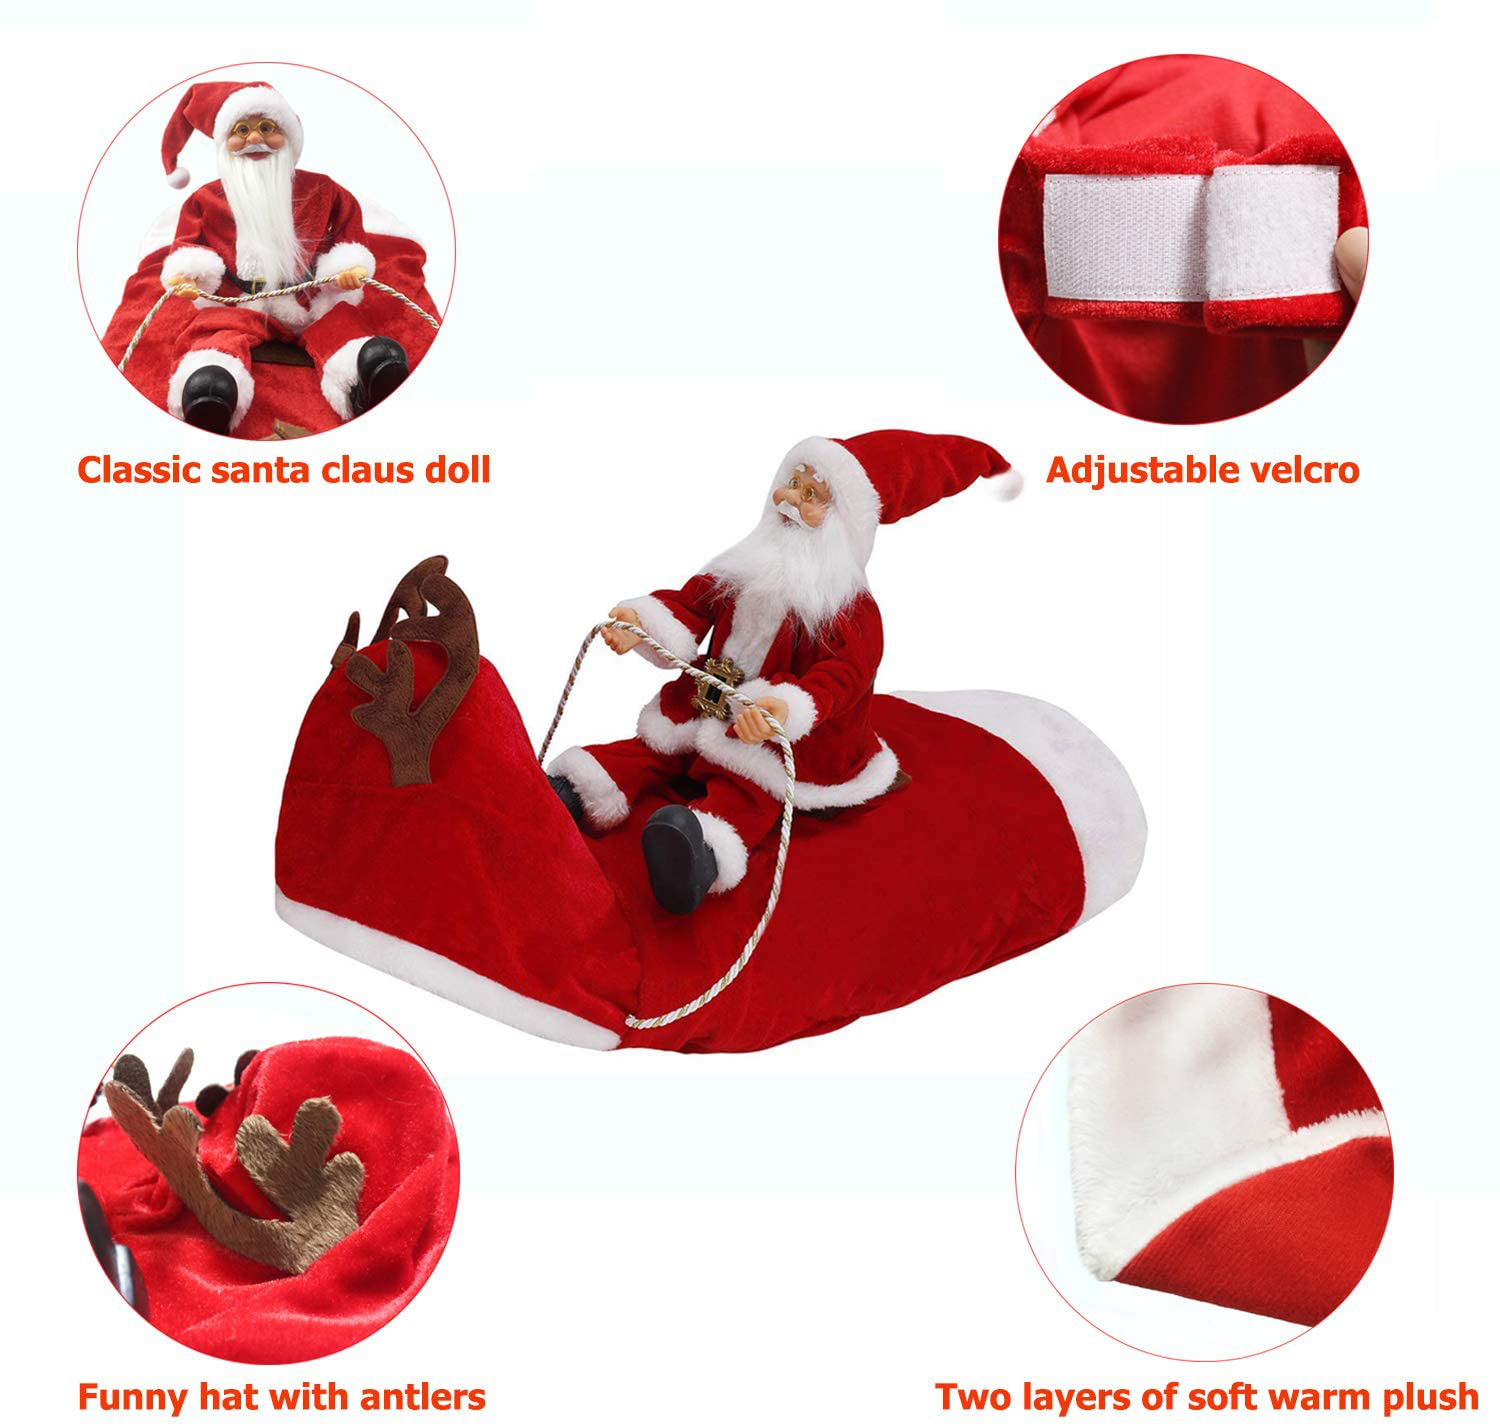 BWOGUE Santa Dog Costume Christmas Pet Clothes Santa Claus Riding Pet Cosplay Costumes Party Dressing up Dogs Cats Outfit for Small Medium Large Dogs Cats